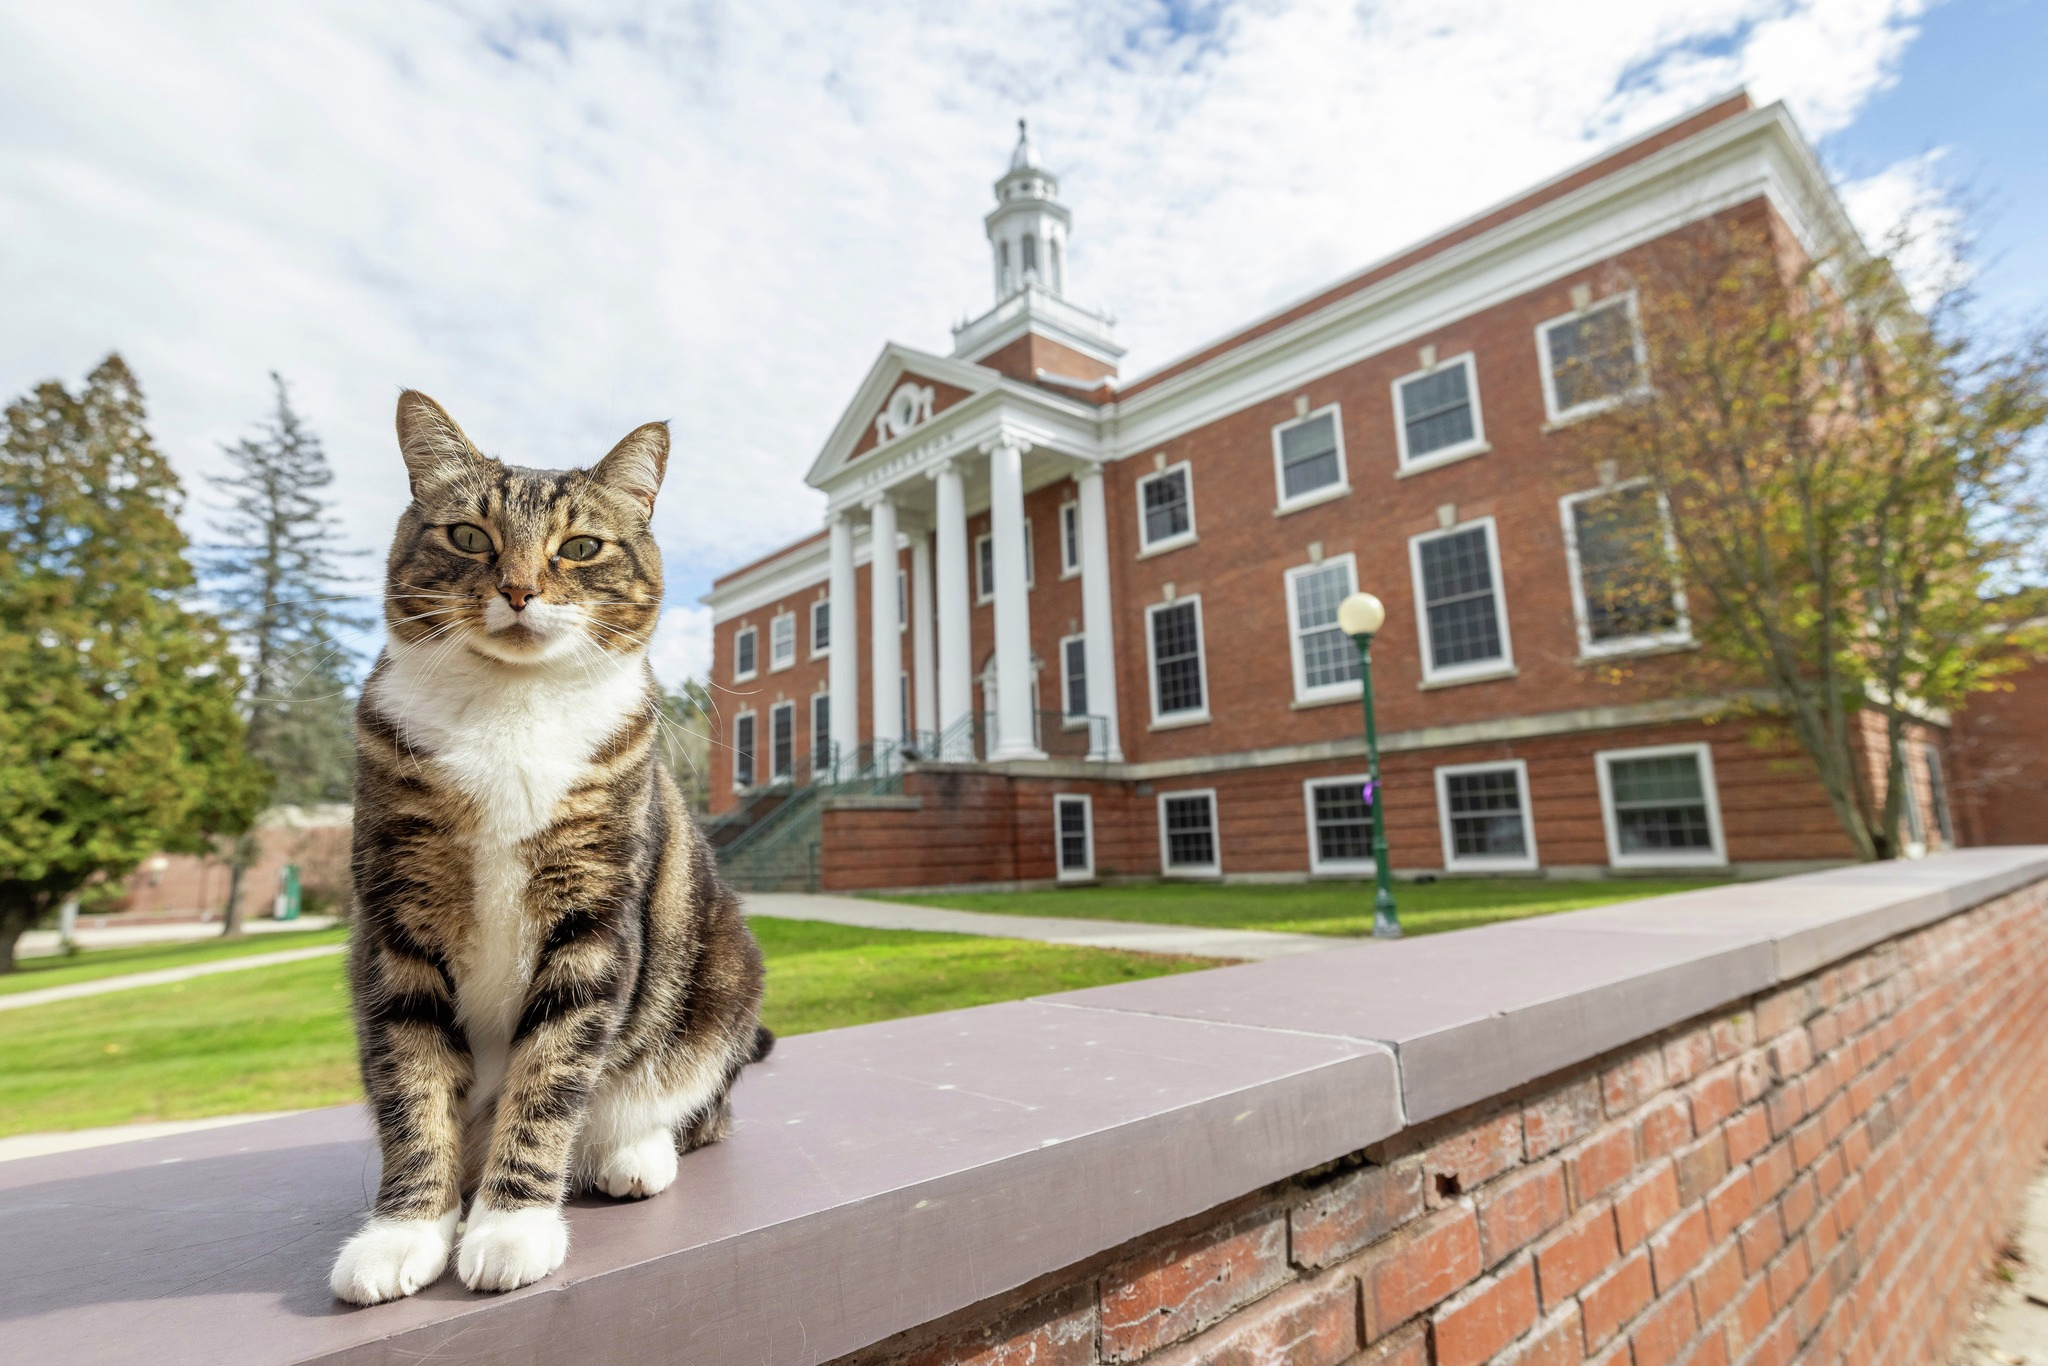 This Vermont cat has received an honorary degree of ‘litter-ature’